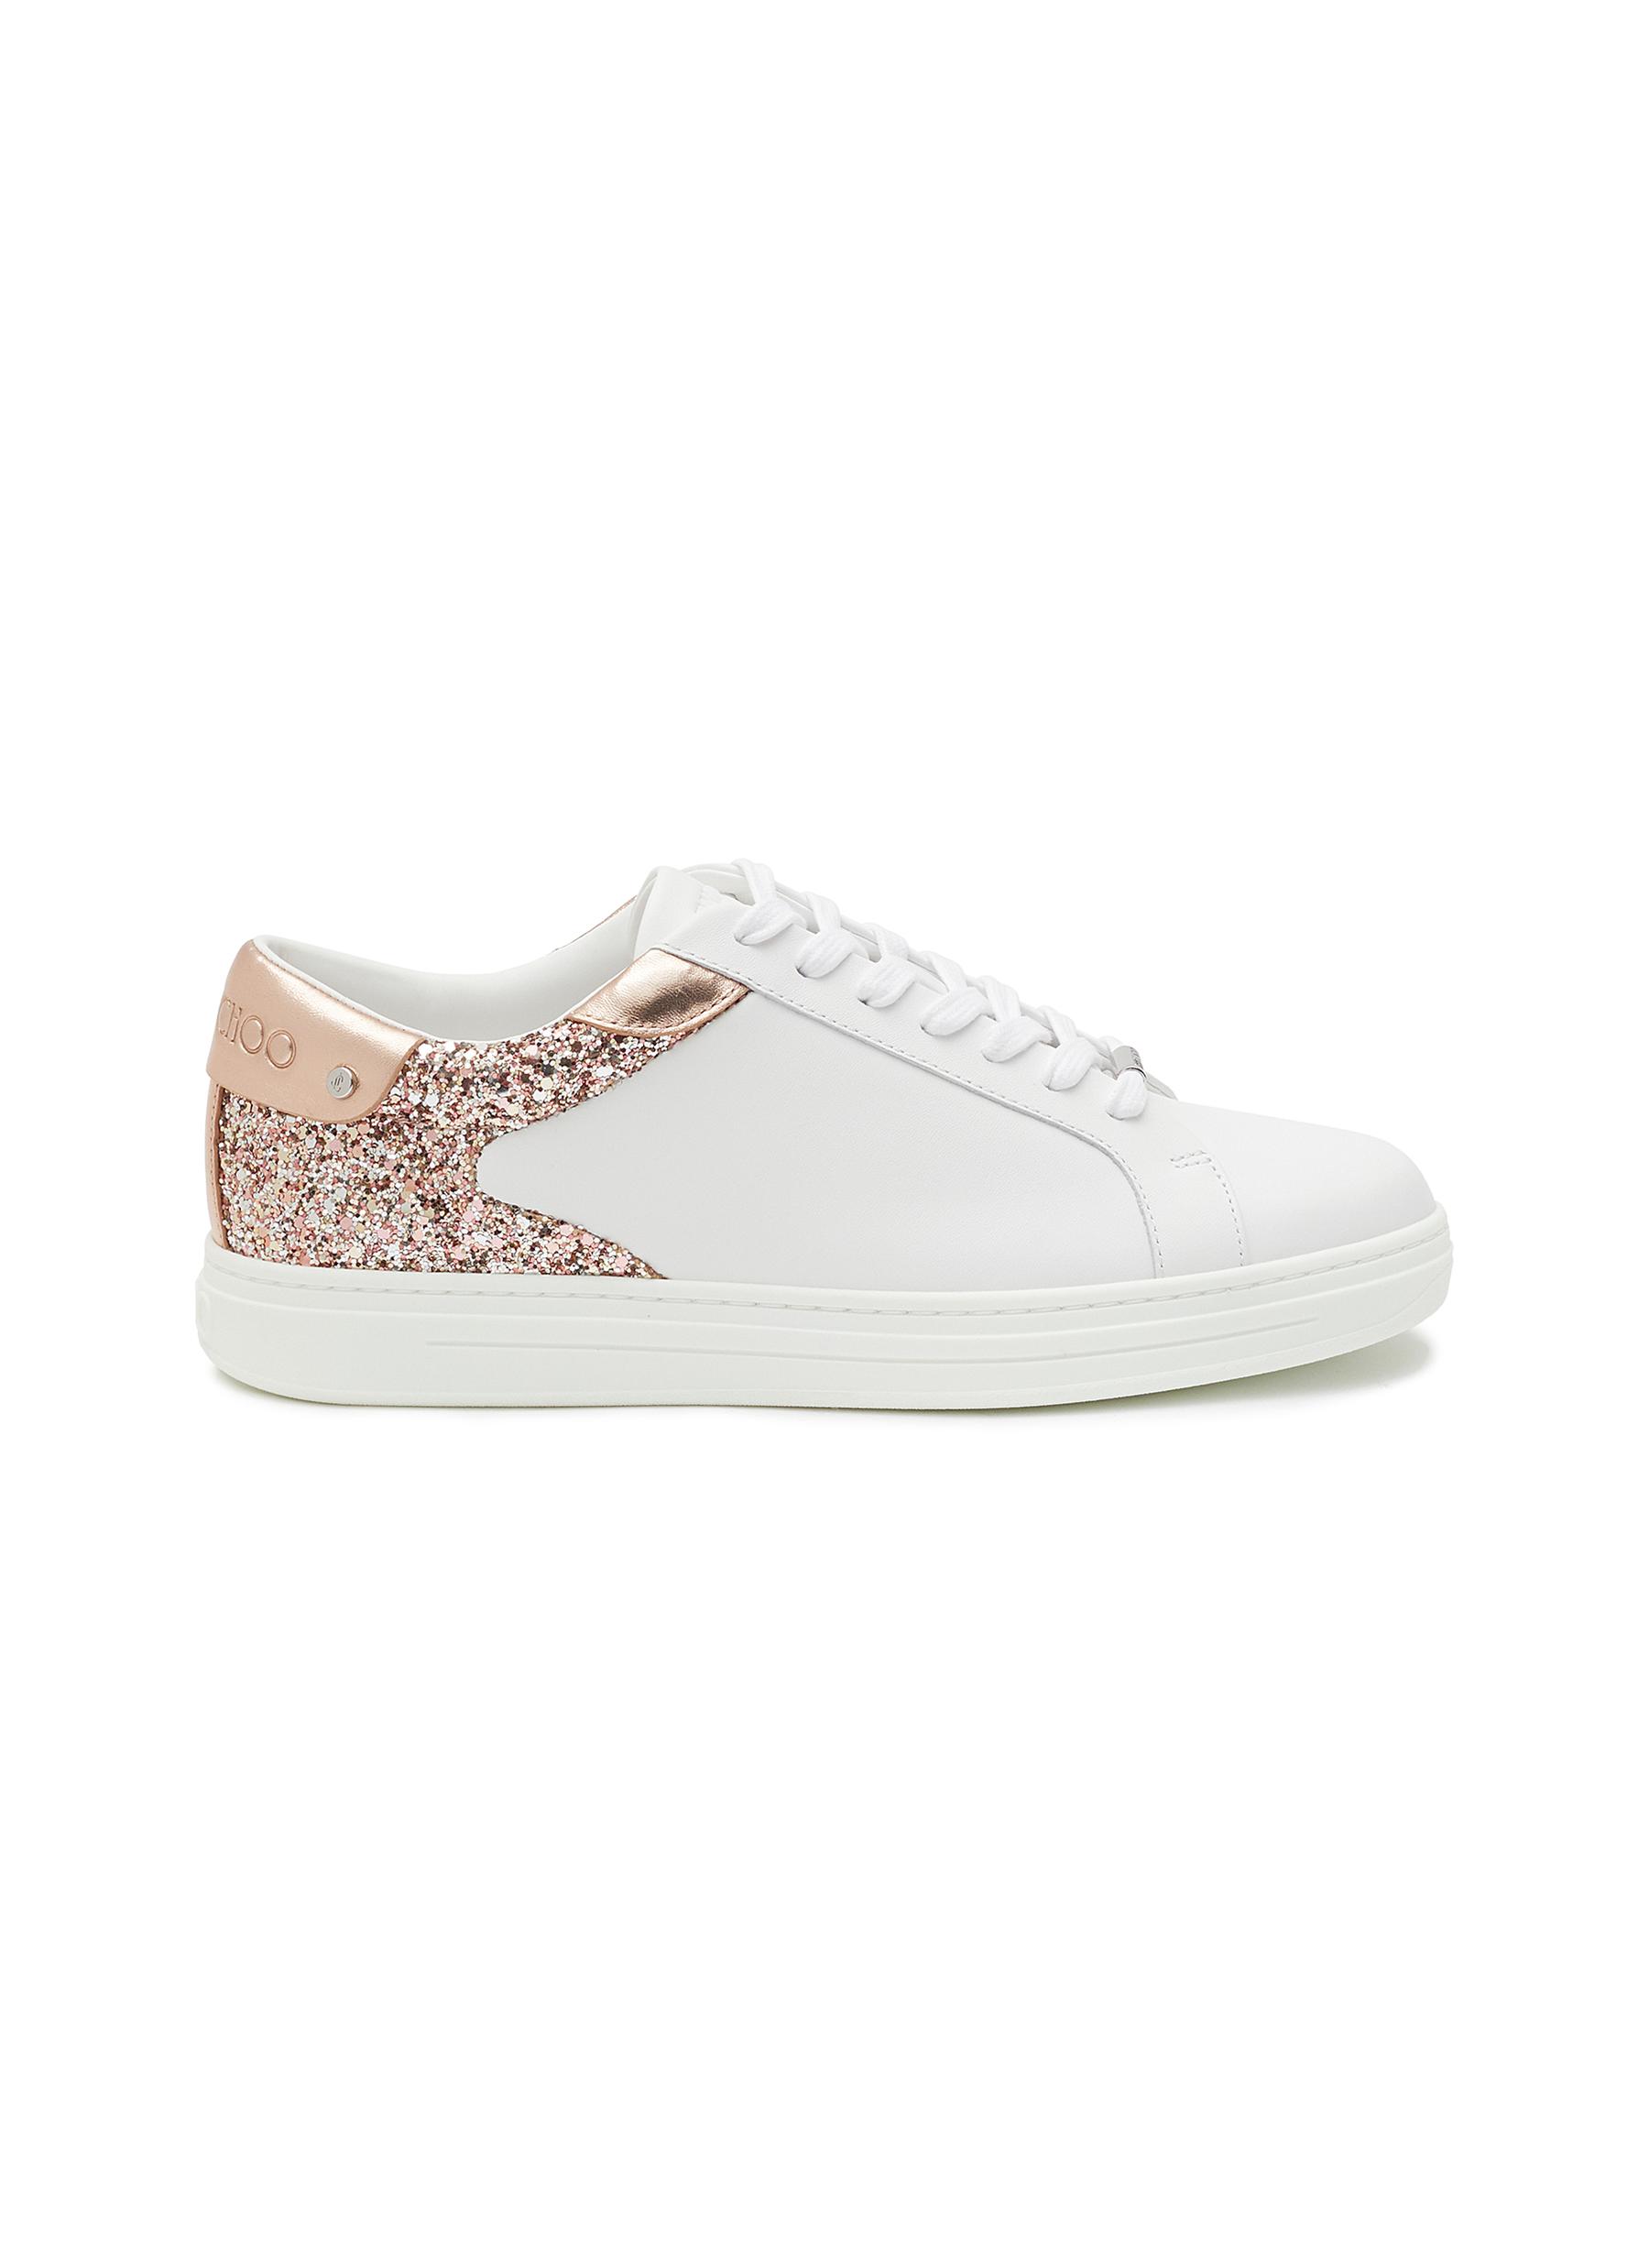 'ROME' LOW TOP LACE UP GLITTER LEATHER SNEAKERS